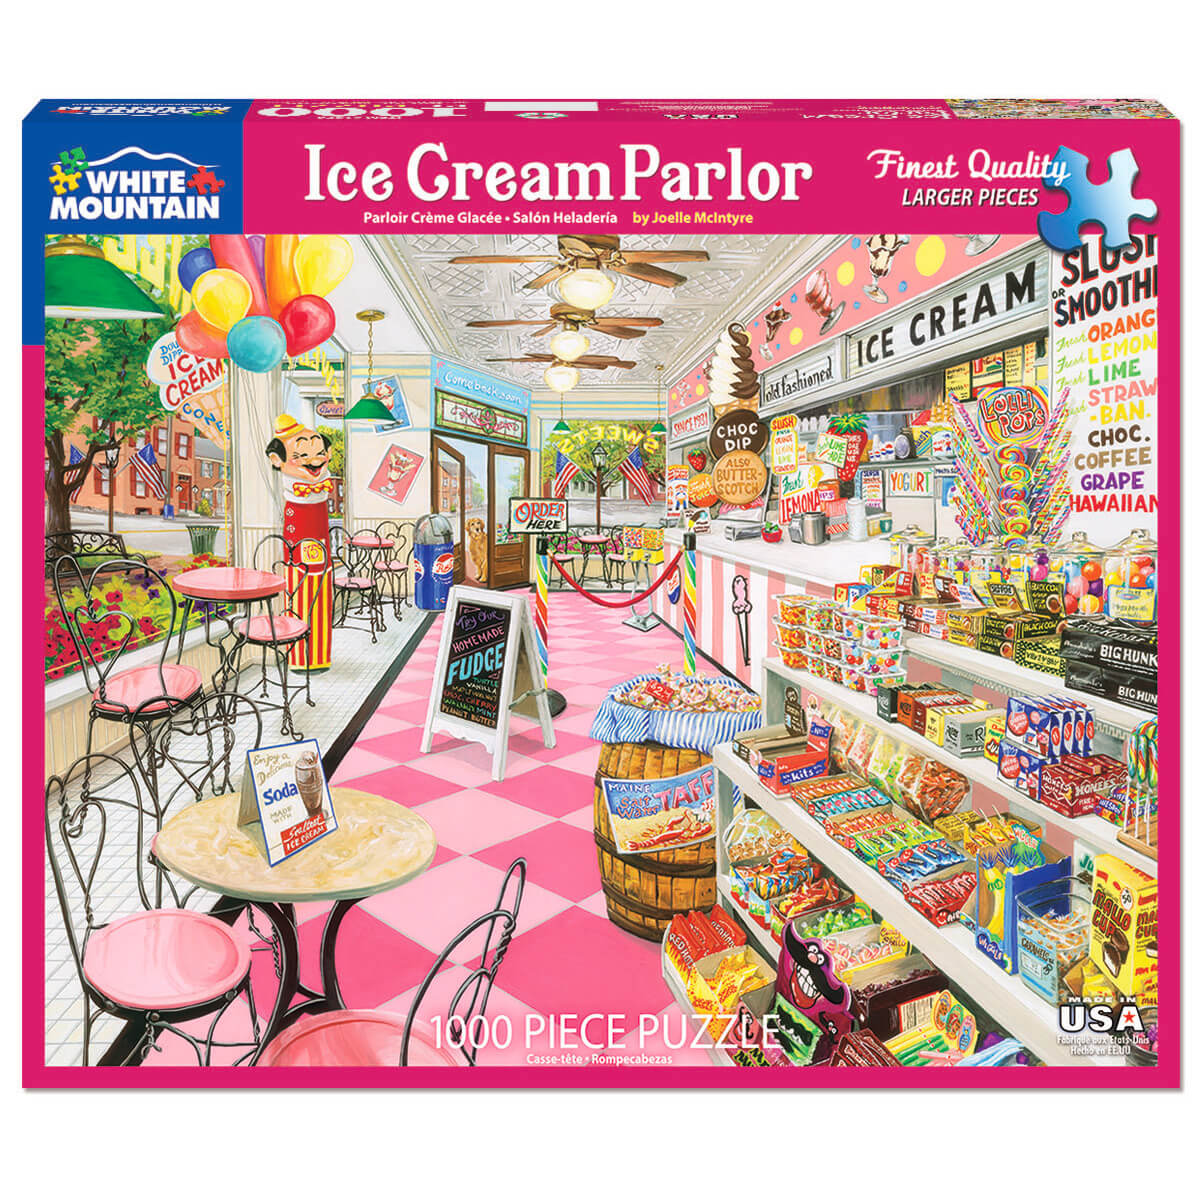 White Mountain Puzzles Ice Cream Parlor 1000 Piece Jigsaw Puzzle